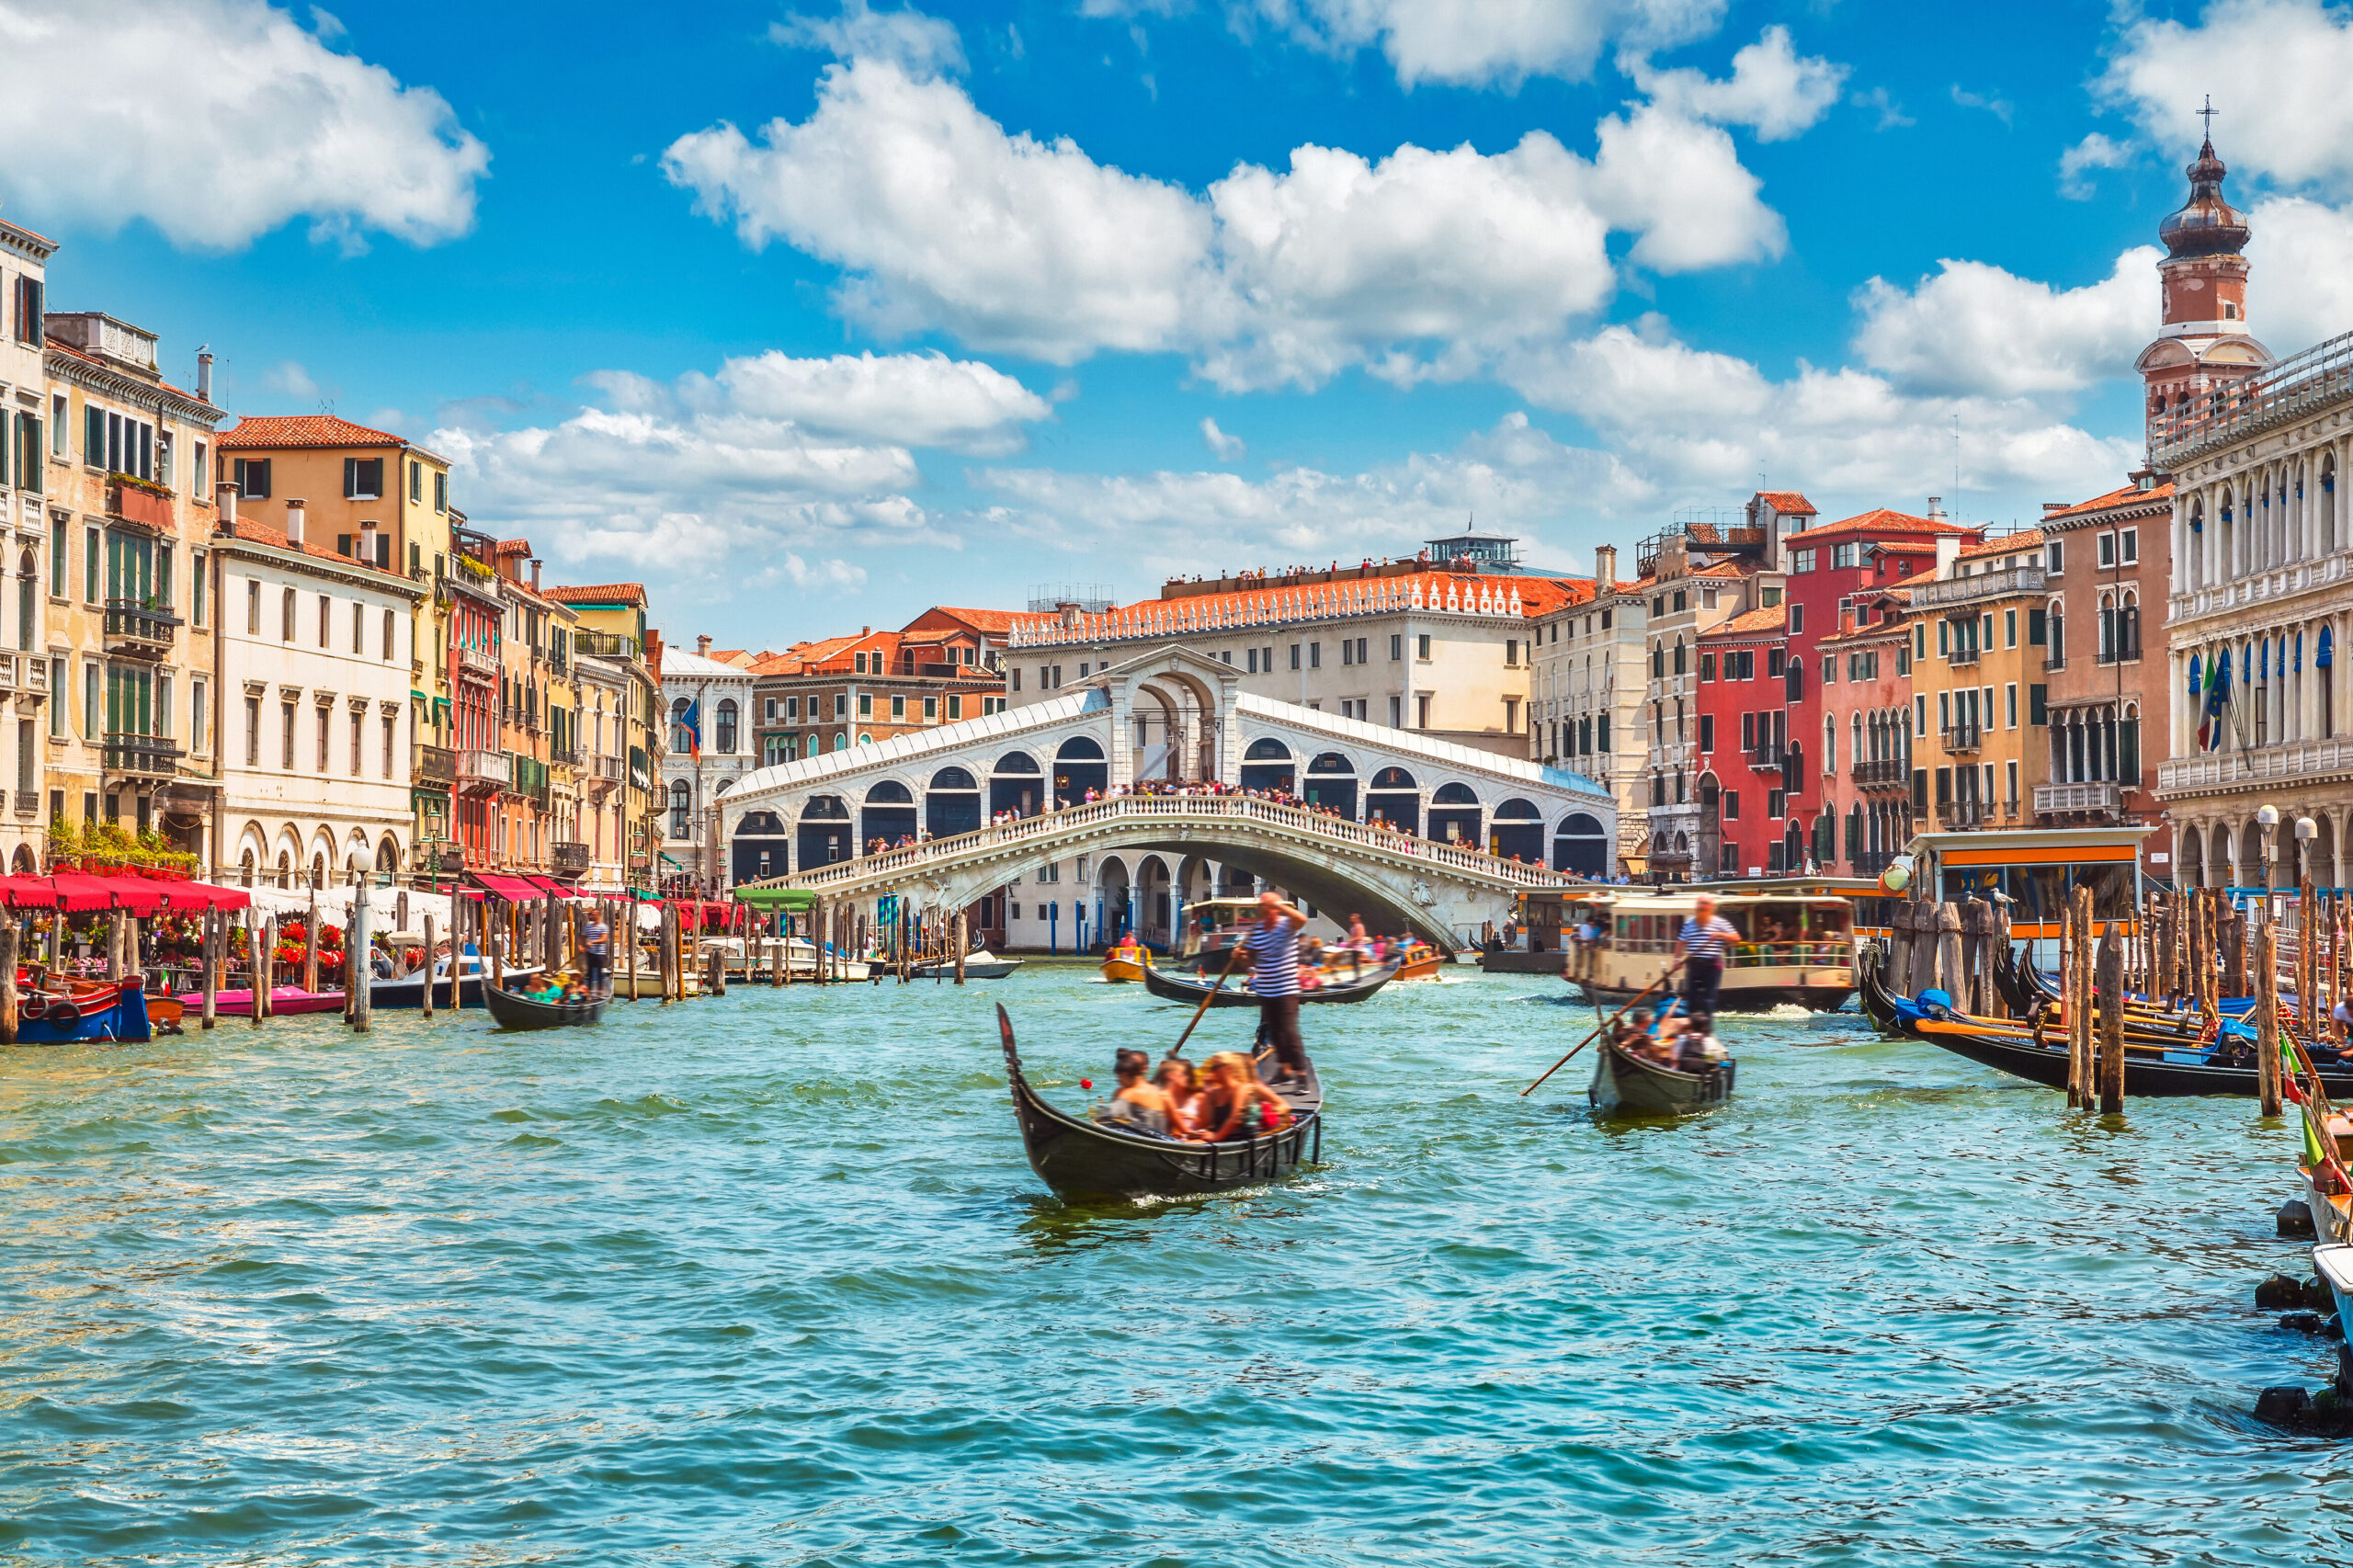 Person navigating a gondola in front of the Bridge Rialto on Grand Canal in Venice, Italy on a clear day